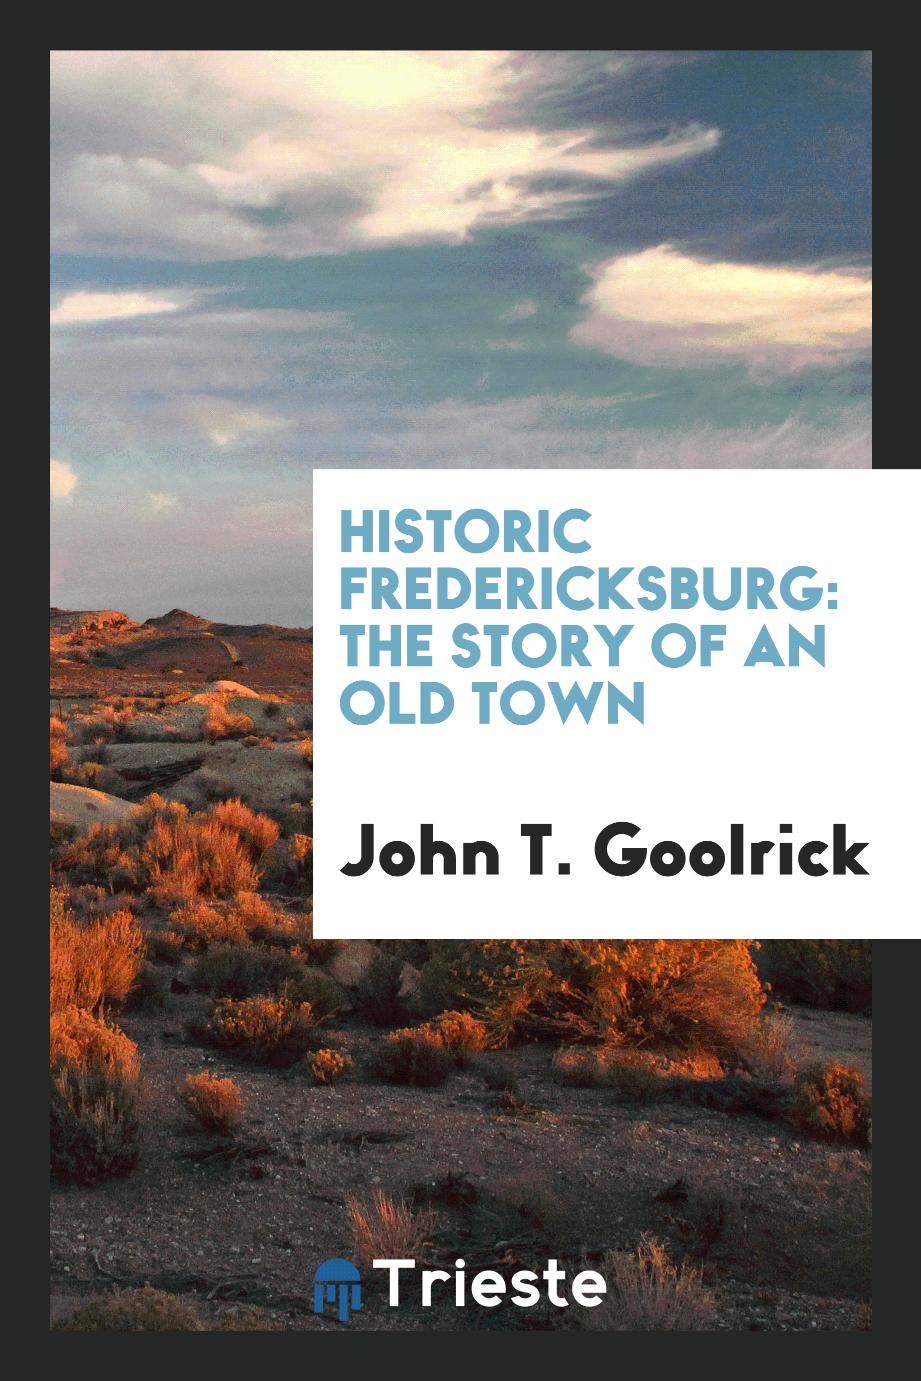 Historic Fredericksburg: The Story of an Old Town